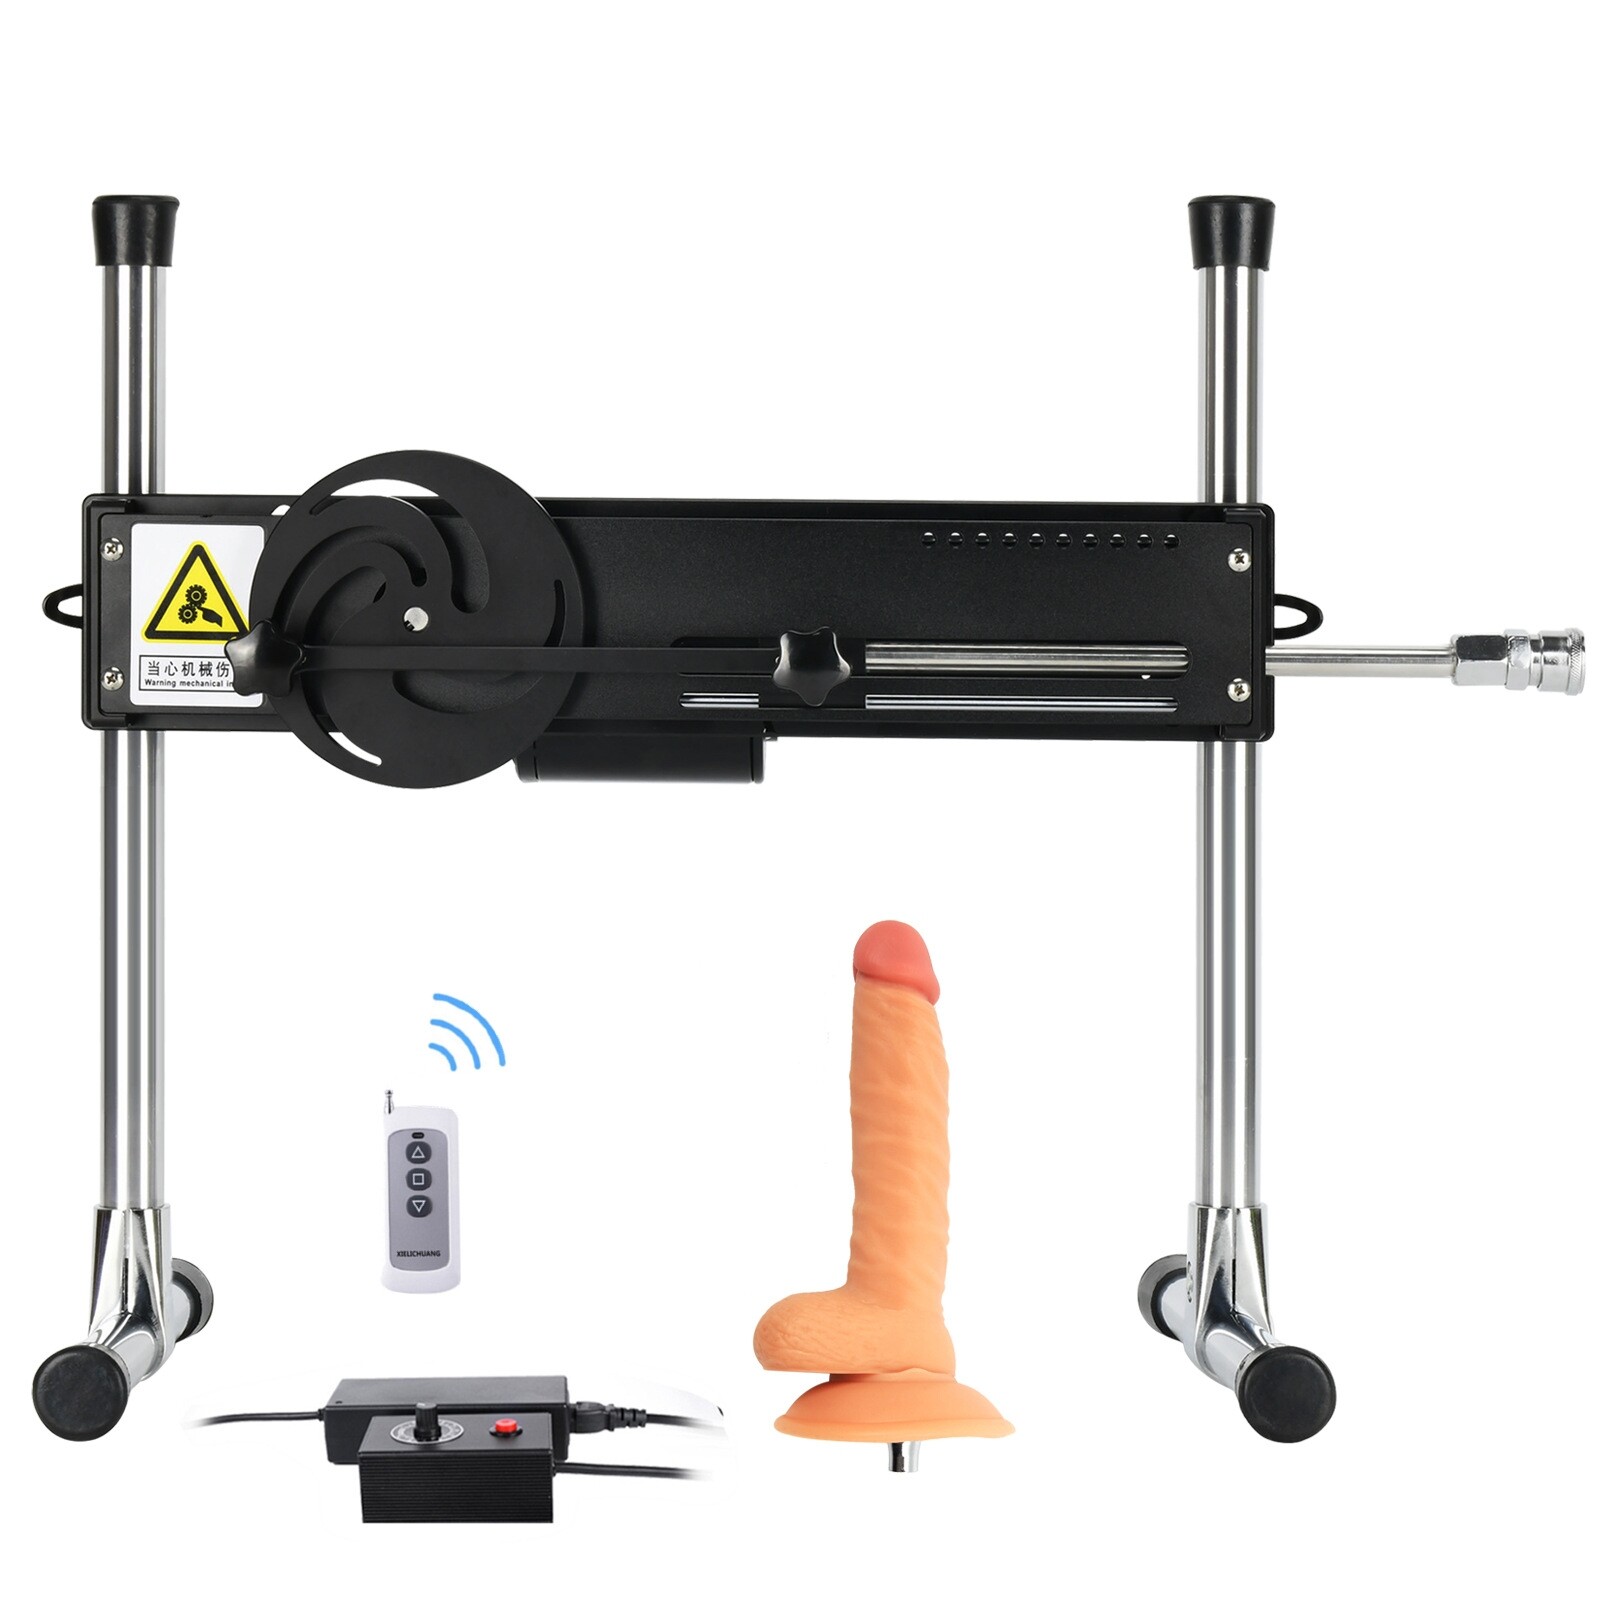 Premium Sex Machine Remote Control With 3PCS Giant Dildos and Suction Cup